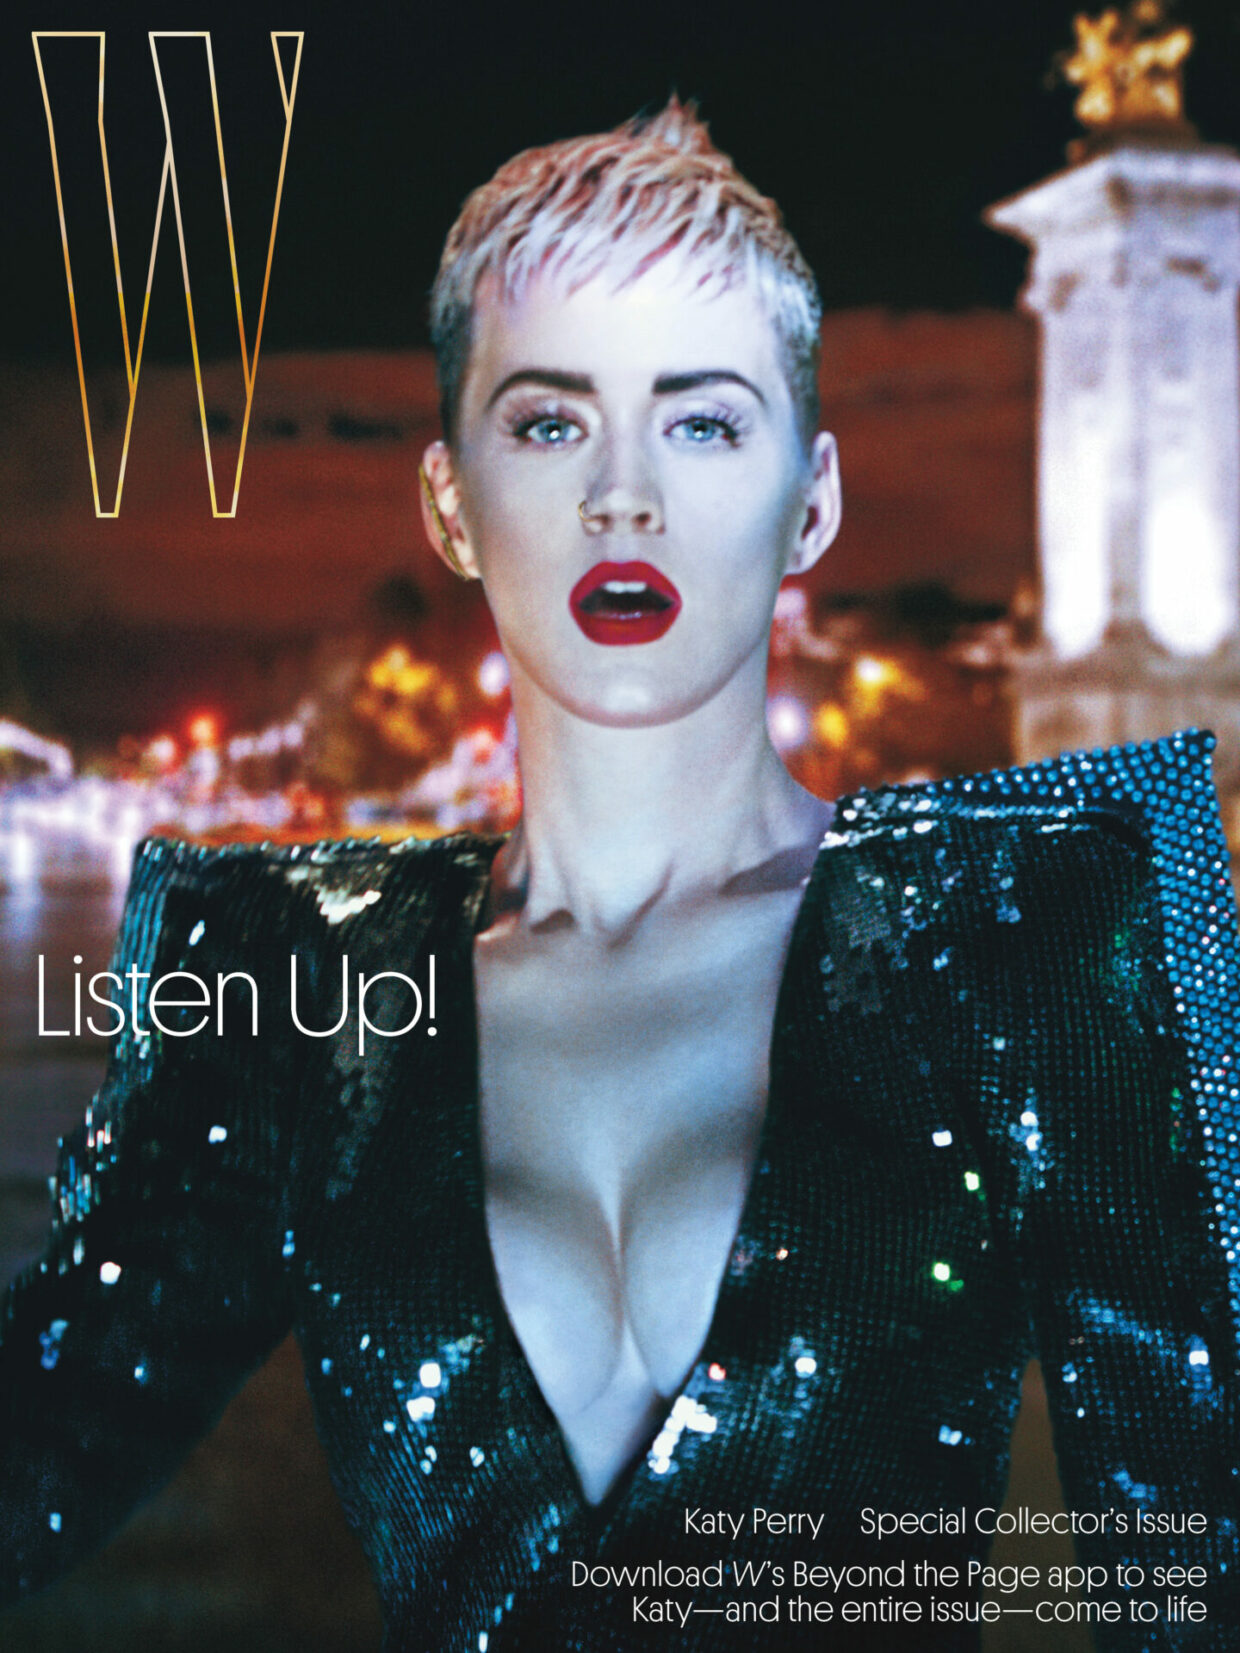 Katy Perry for W Magazine’s September Issue with Light Direction by John Torres | 2